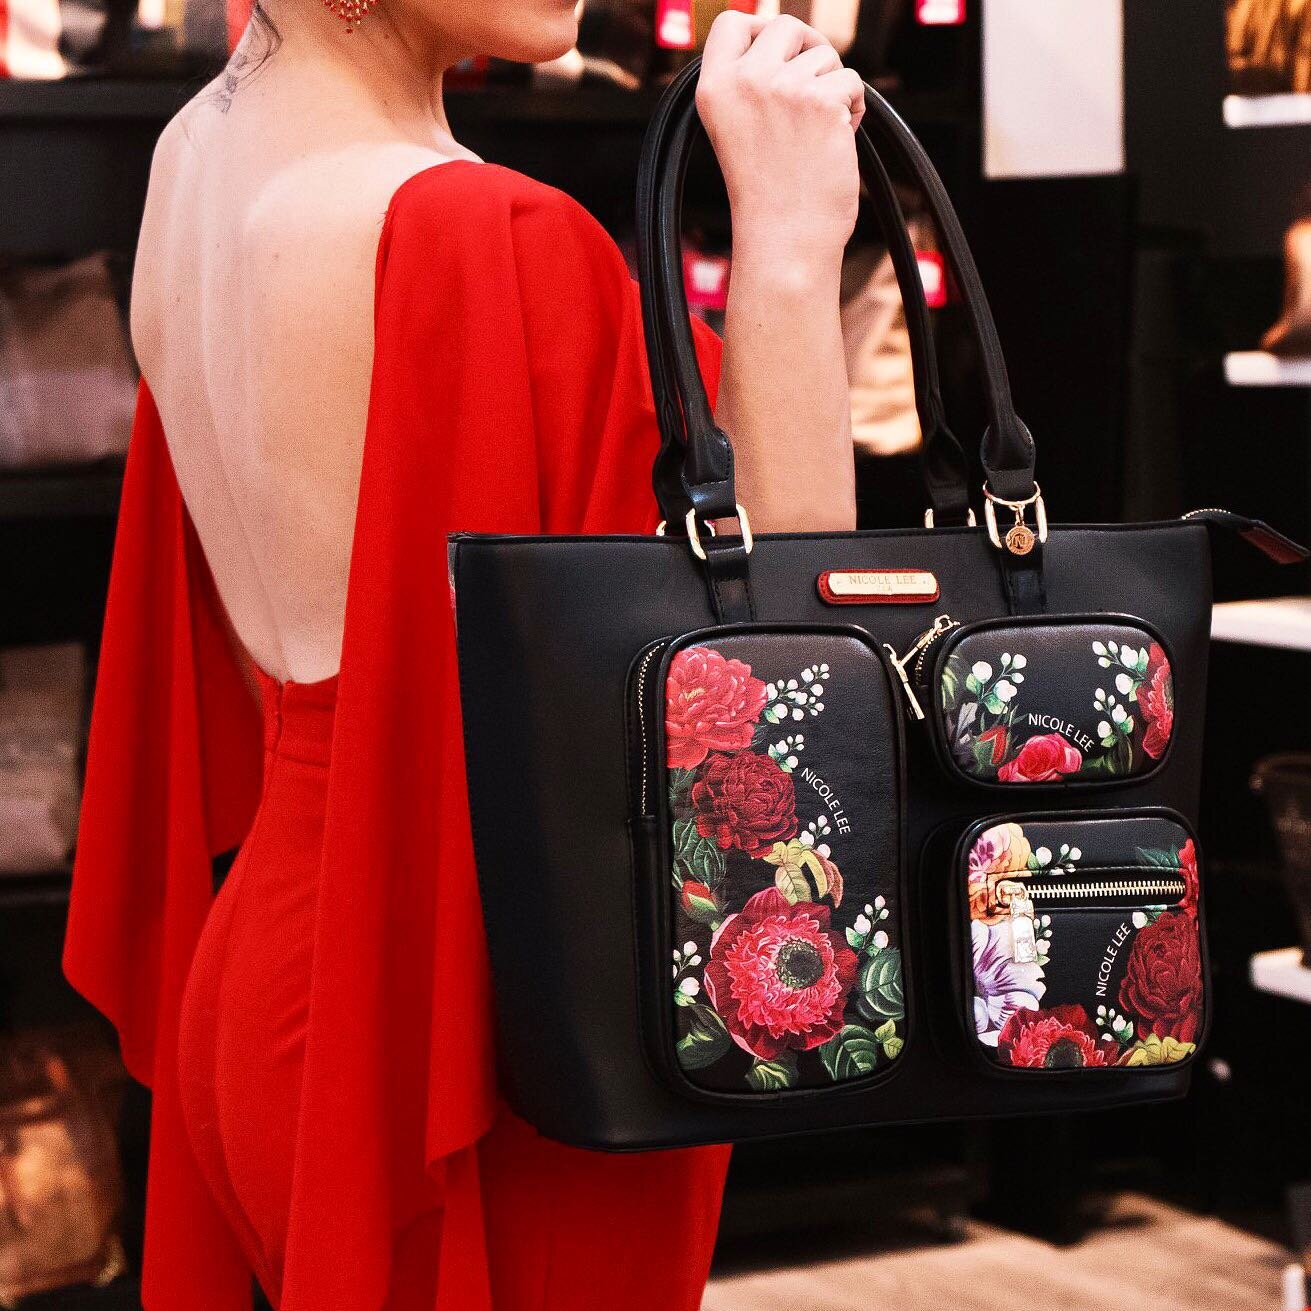 The efficient and compact Beauty in the Dark Floral Shopper Bag will be the only bag you will ever need to take on a shopping day!💐🌺👜 Tap the picture to see prices or visit the link in our official website to shop our new arrivals!

📸 credit: @ni